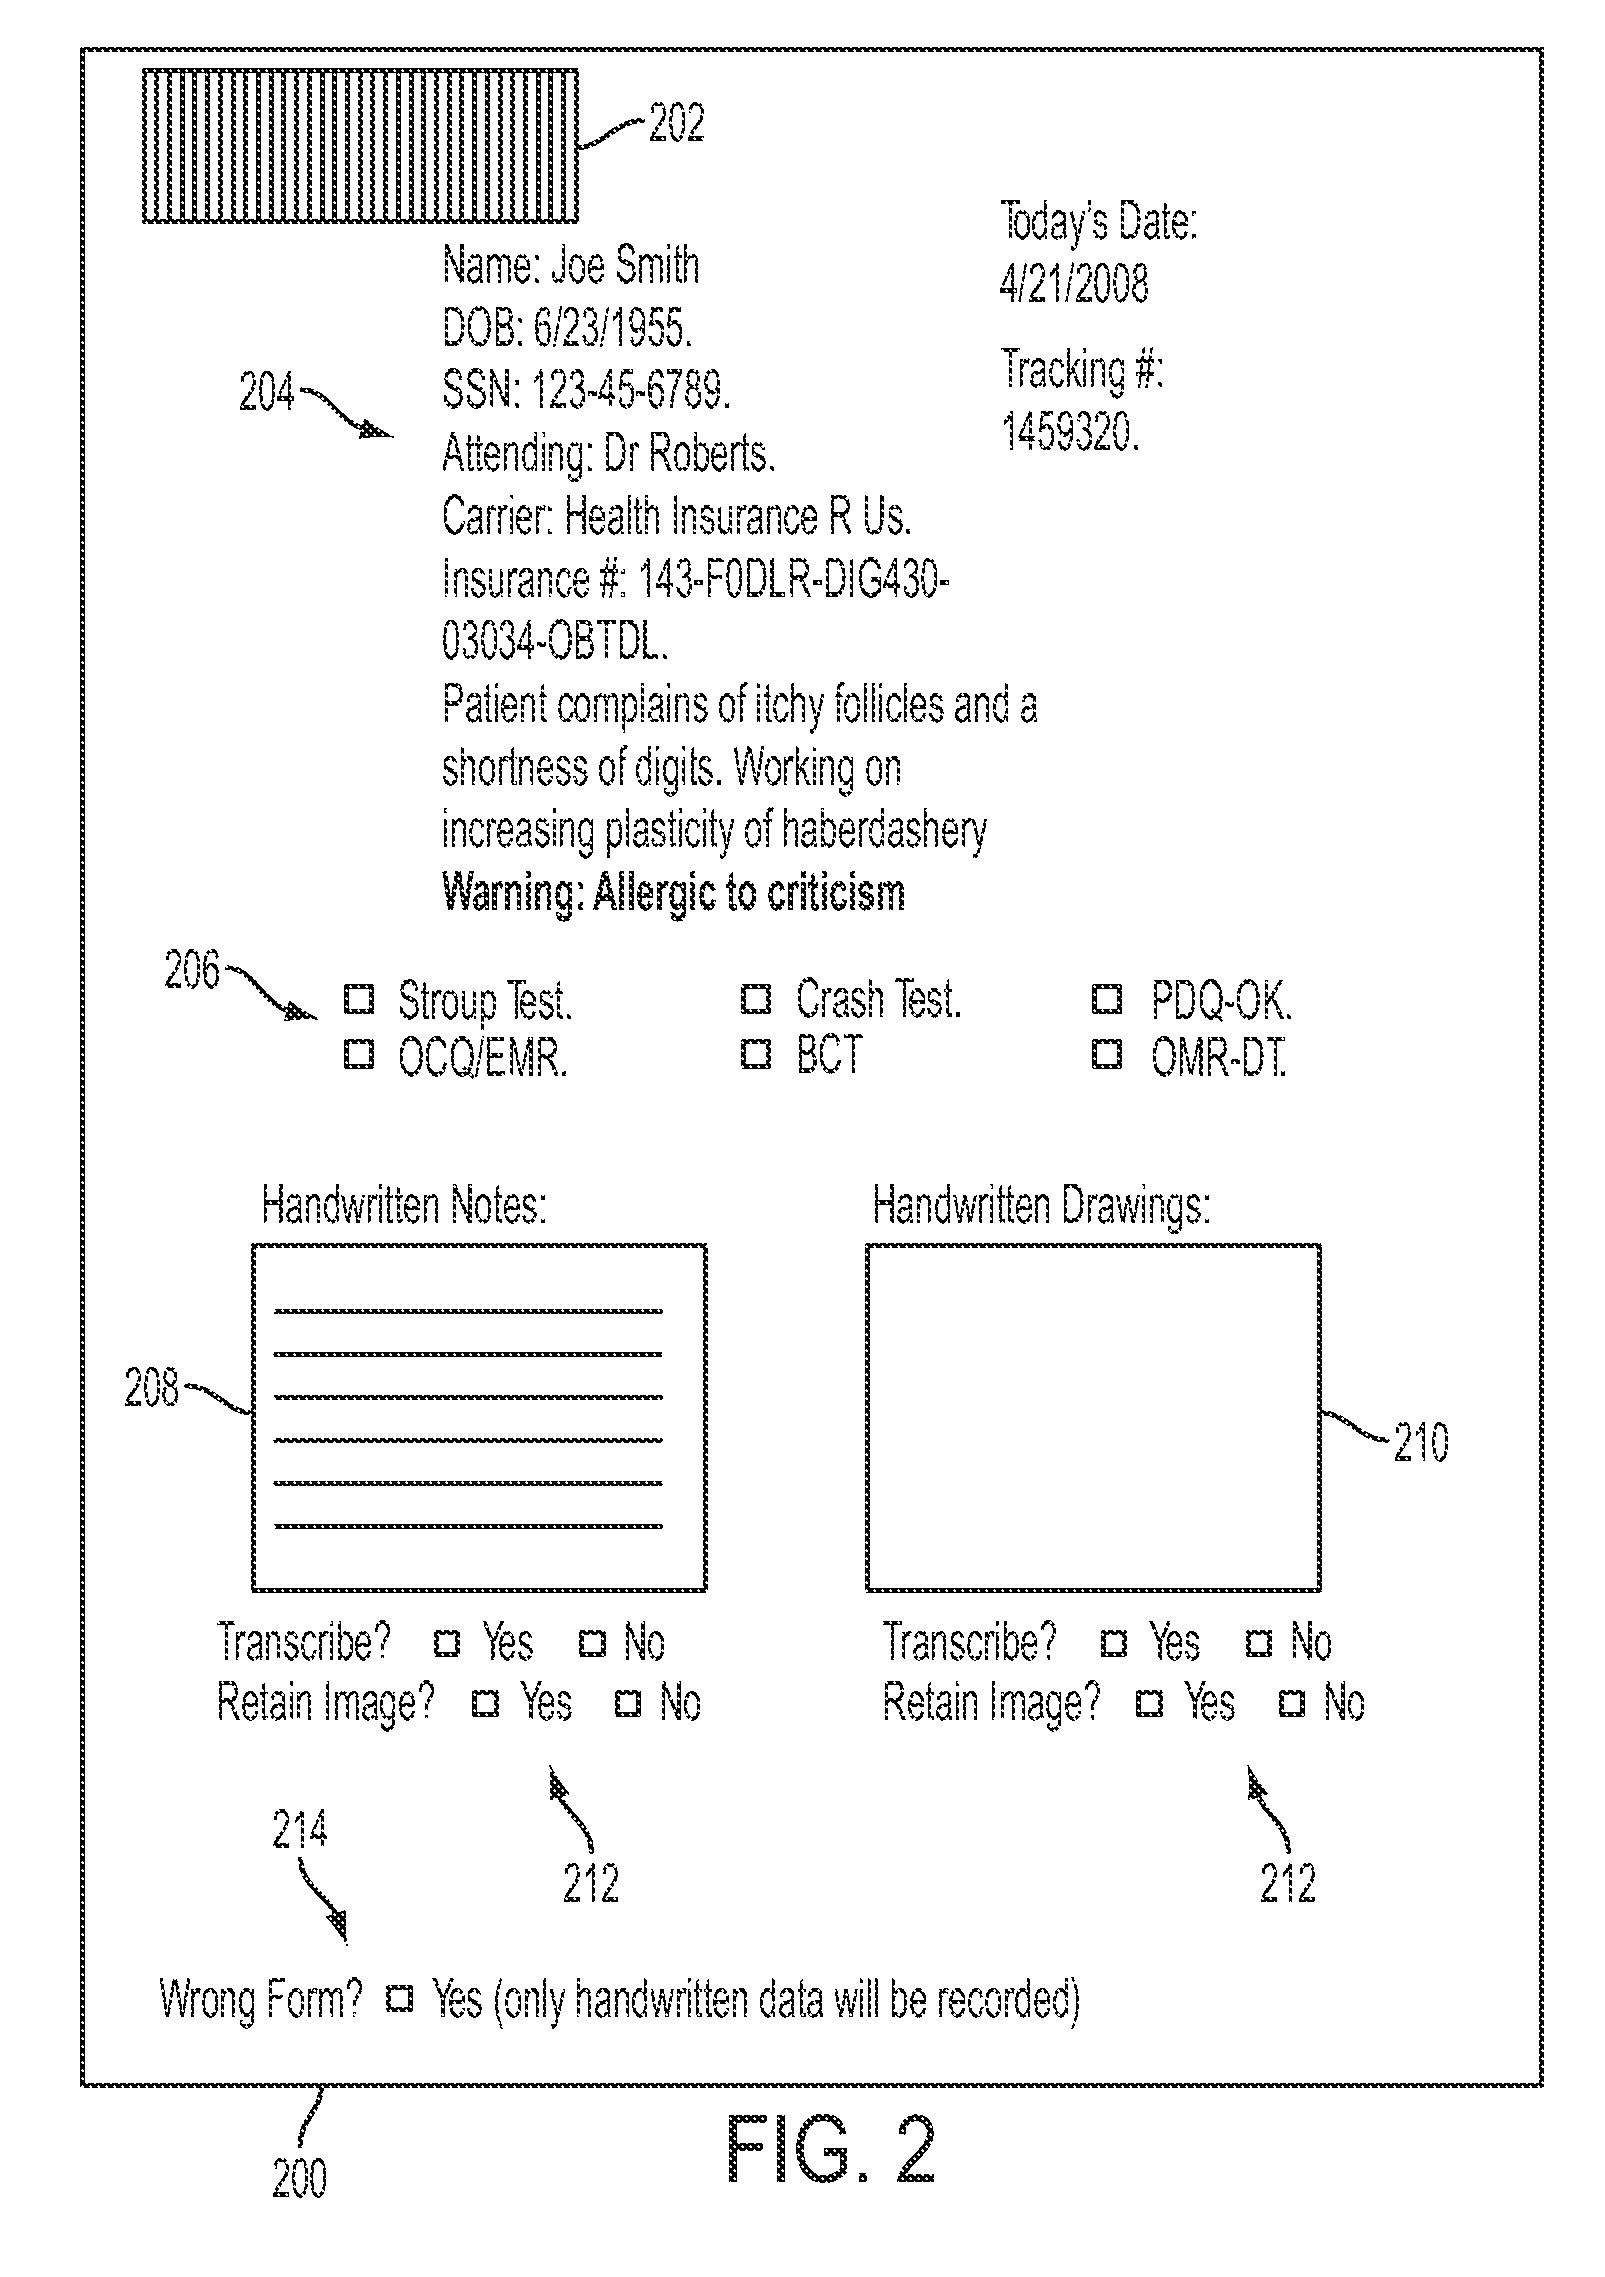 Paper interface to an electronic record system